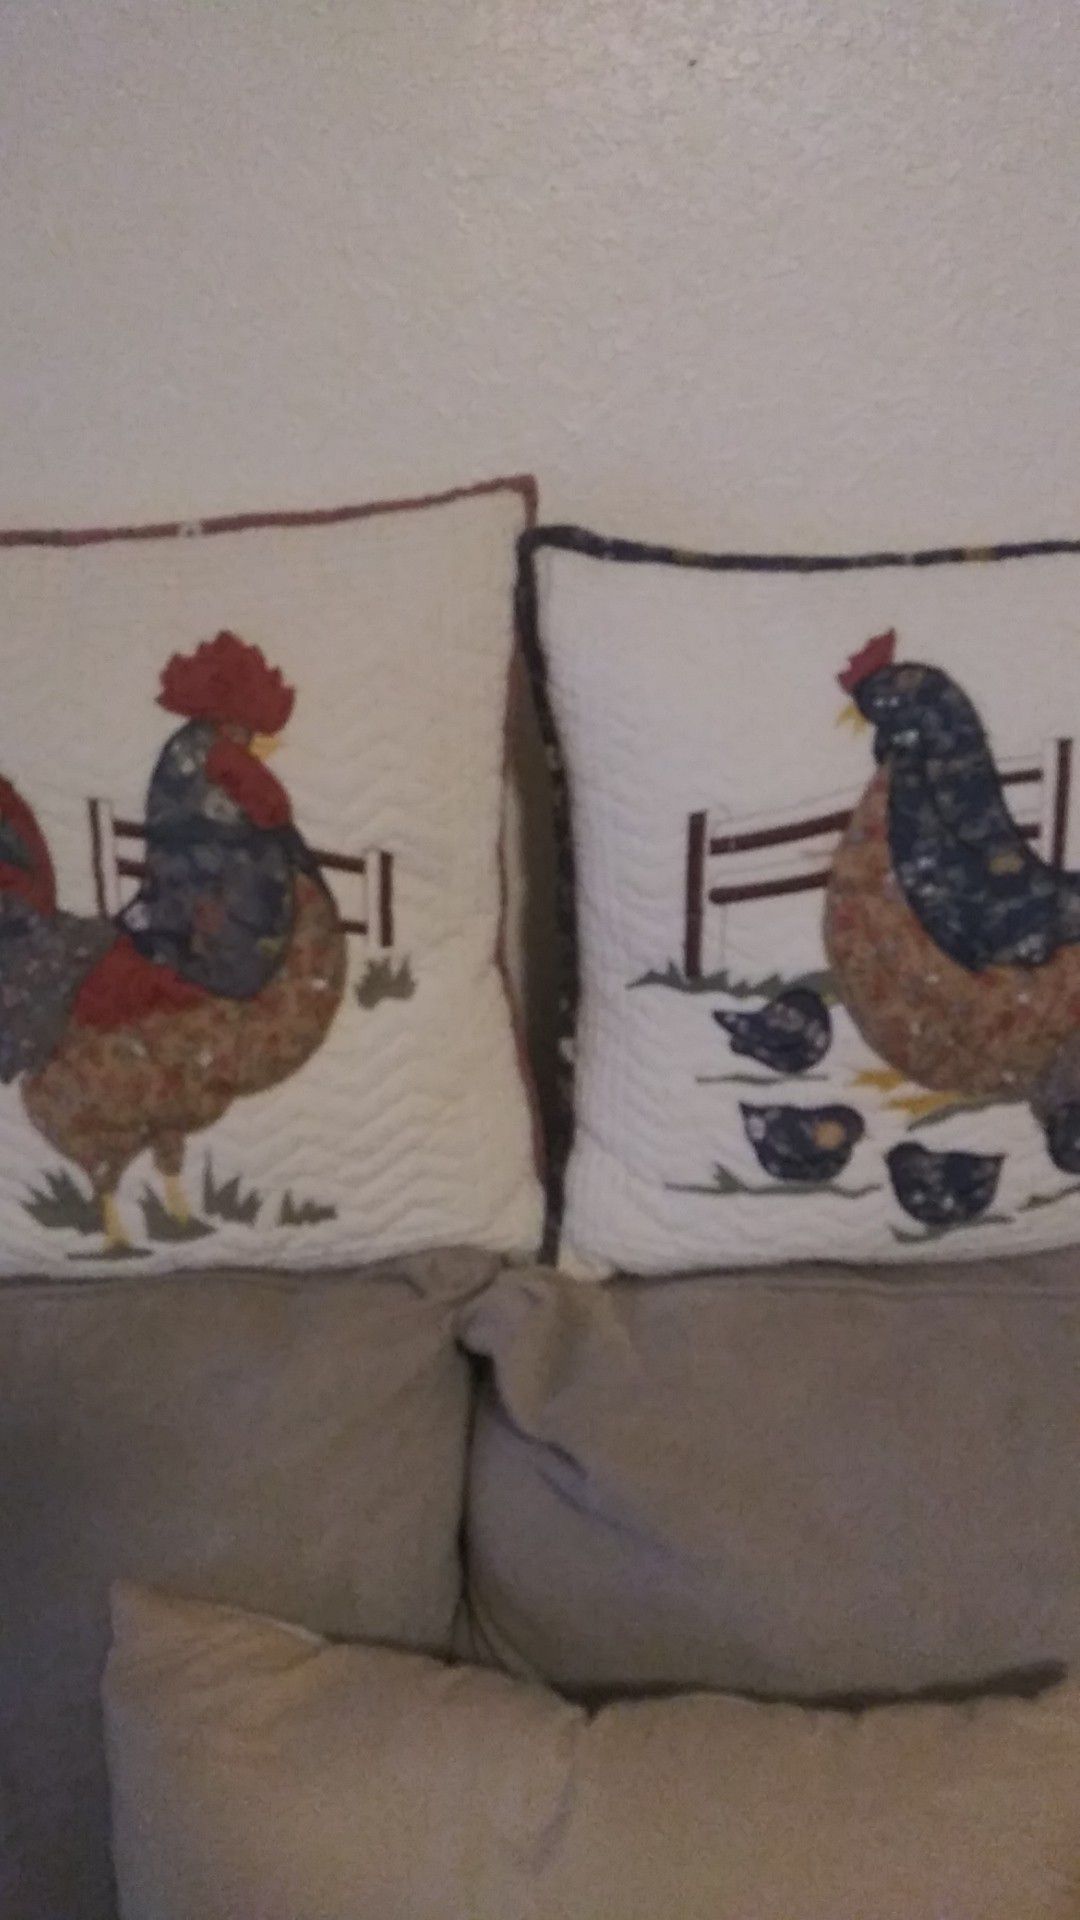 A set of country chicken/Roster pillows. Pickup in Alamo please